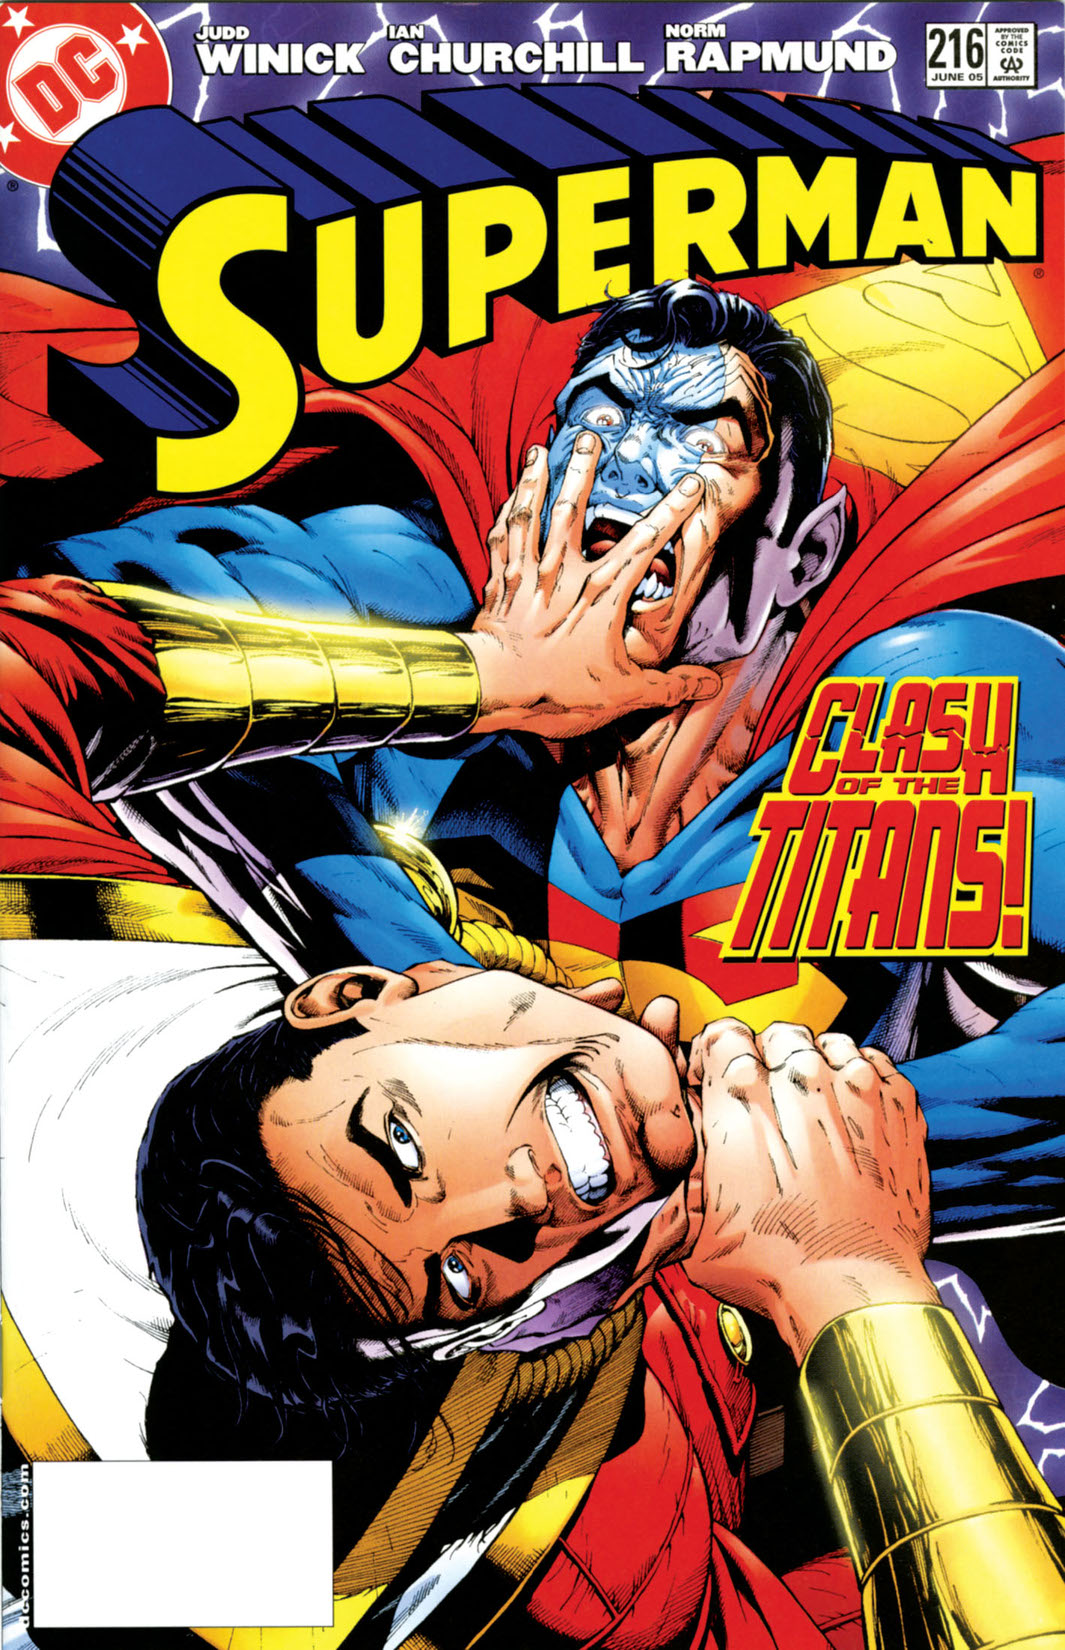 Superman (1986-) #216 preview images